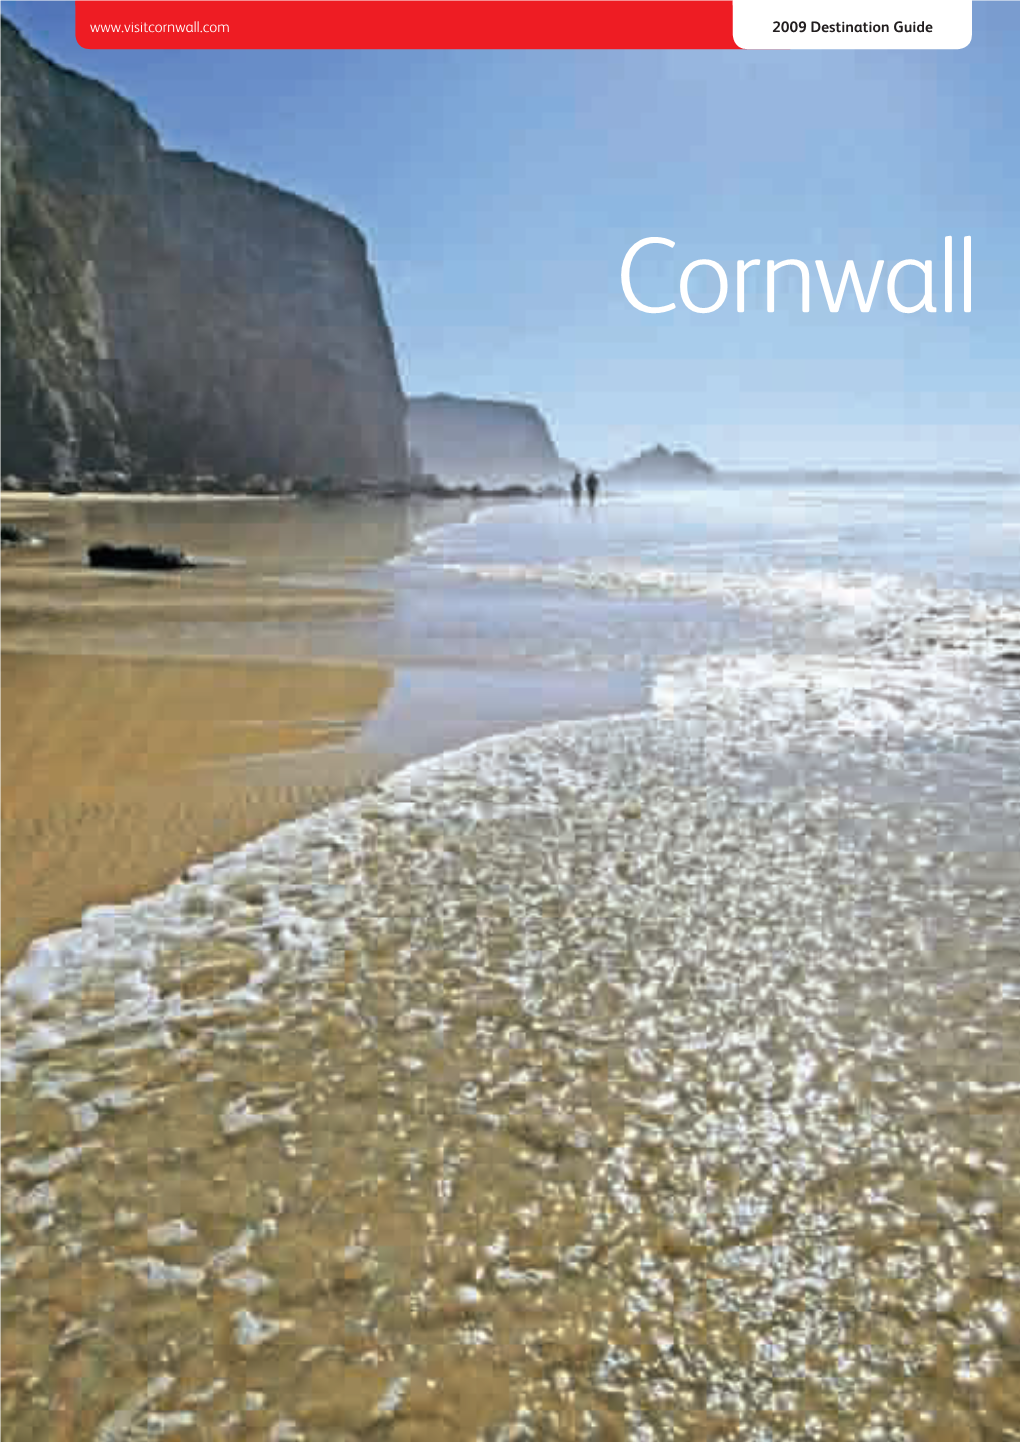 Cornwall.Com 2009 Destination Guide Cornwall Is Often Described As the ‘Garden Capital of the World’… Cornwall